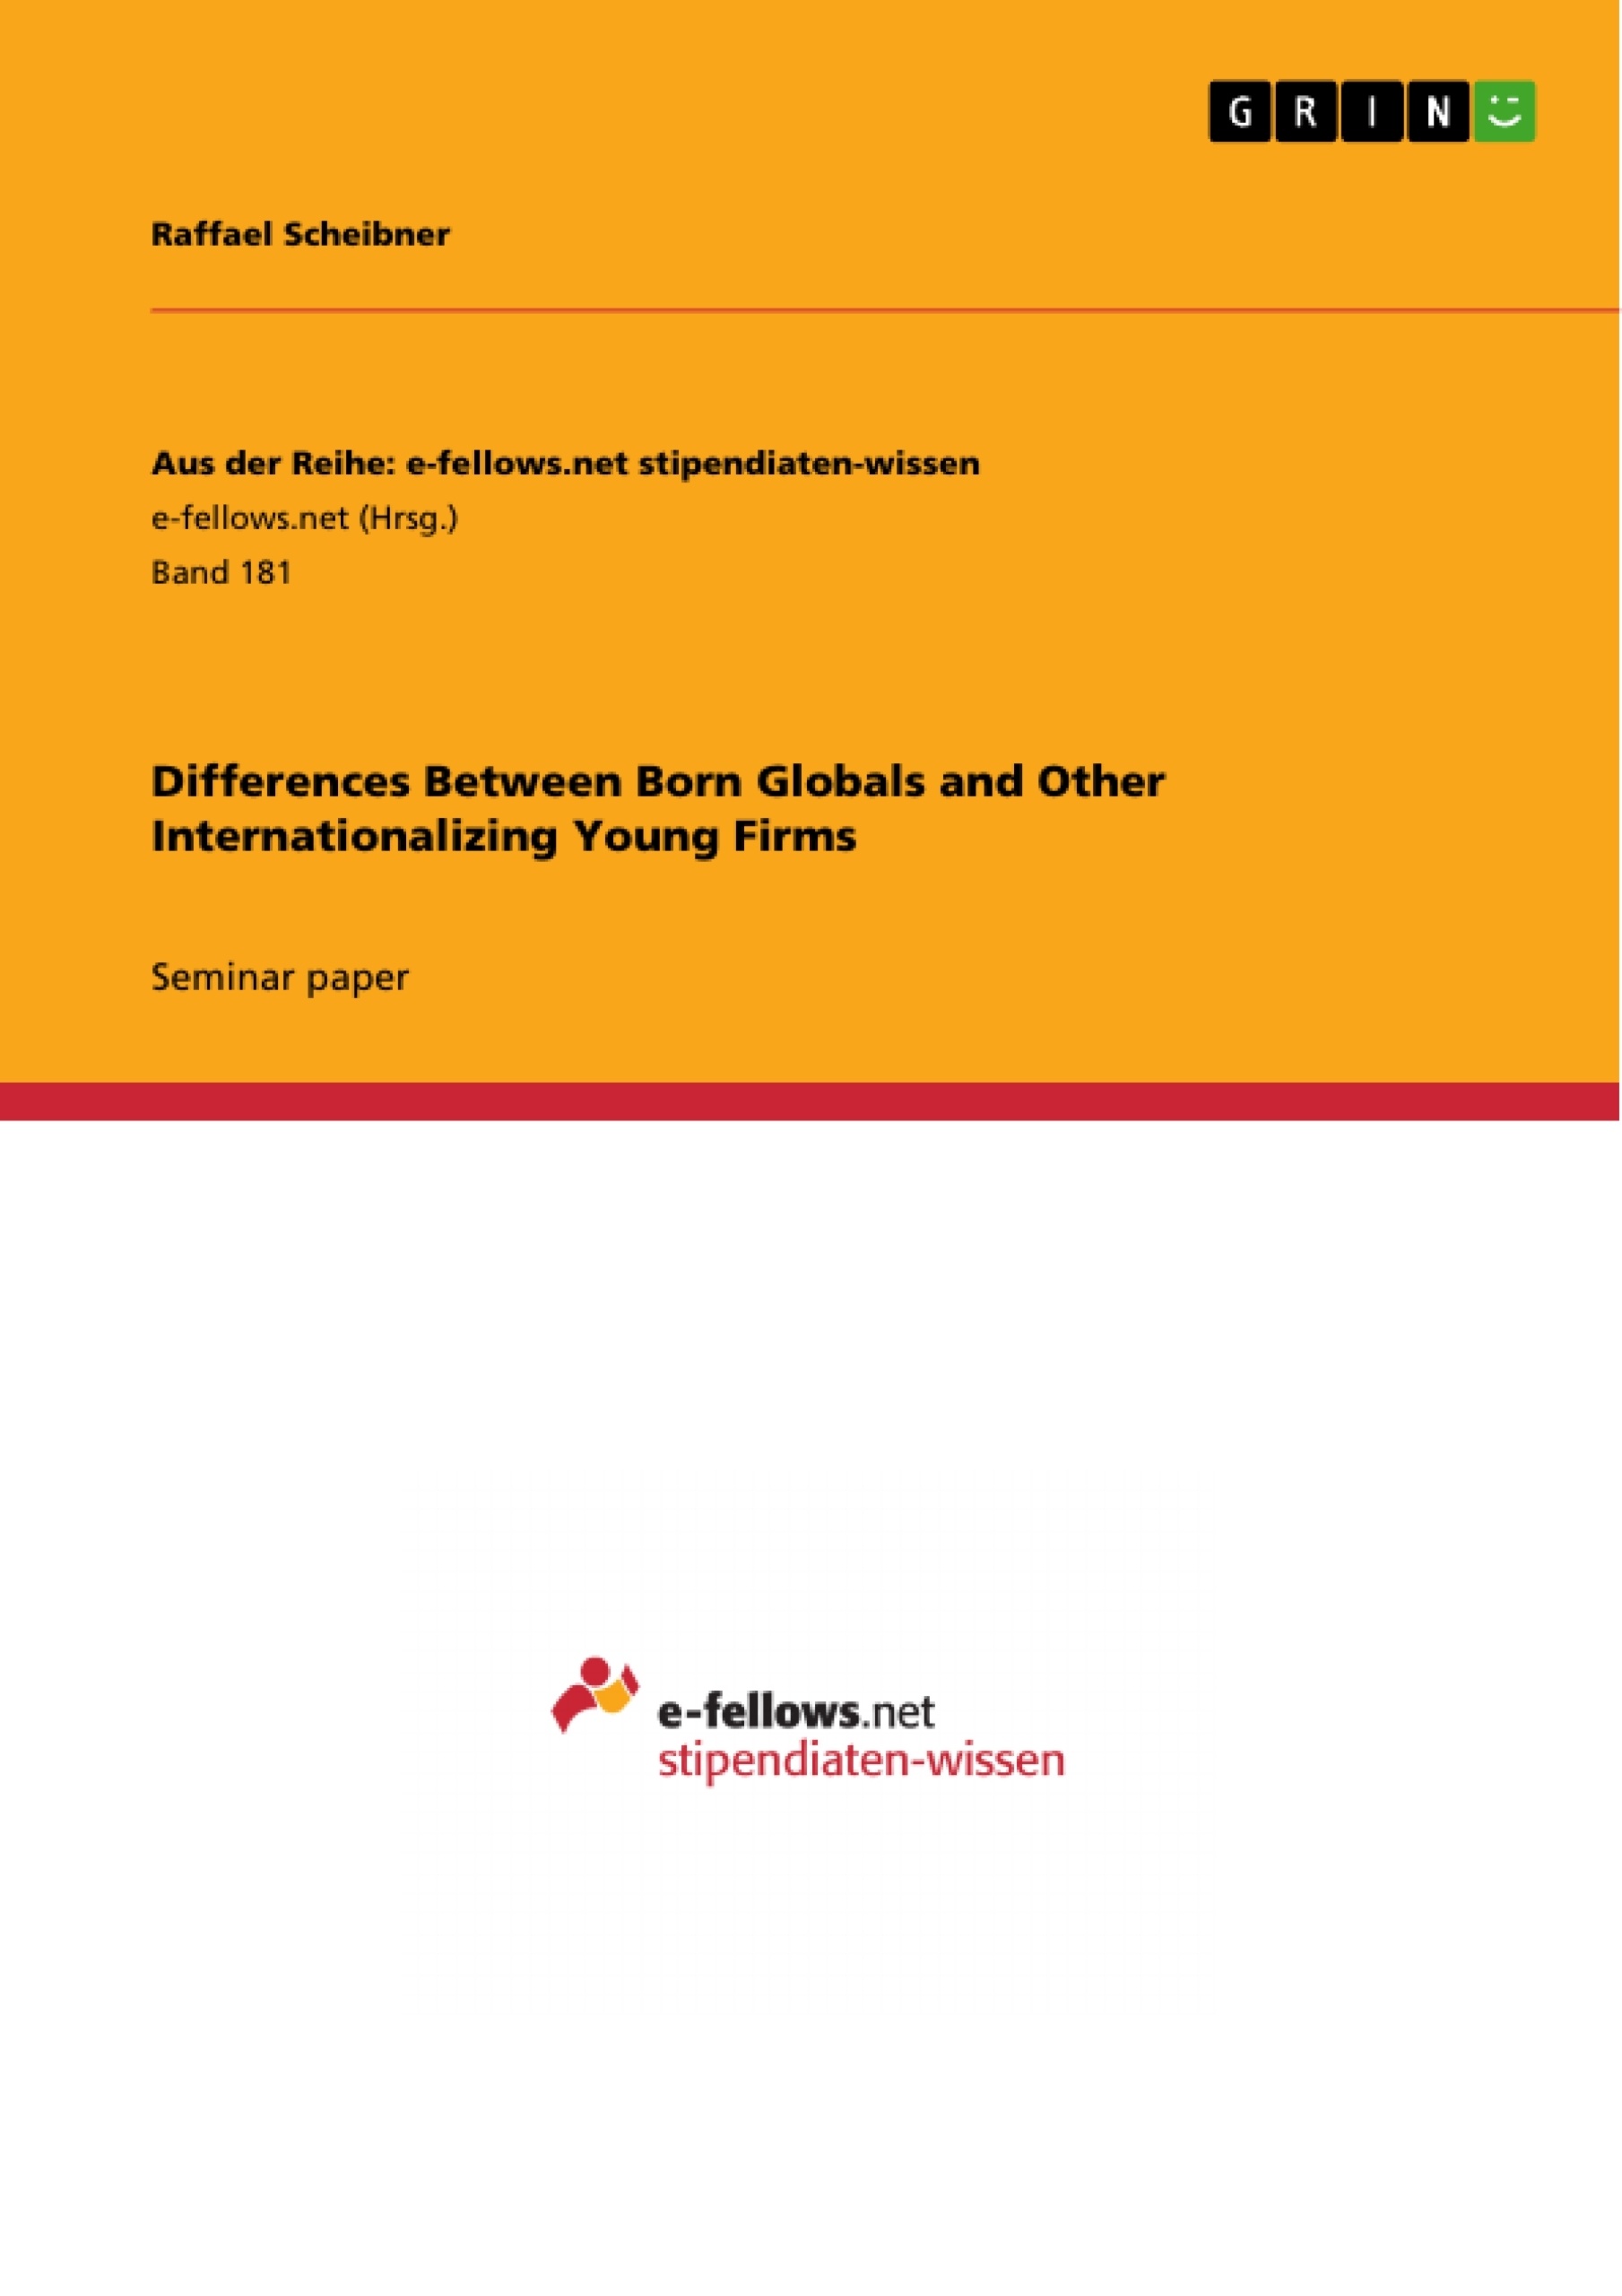 Titre: Differences Between Born Globals and Other Internationalizing Young Firms